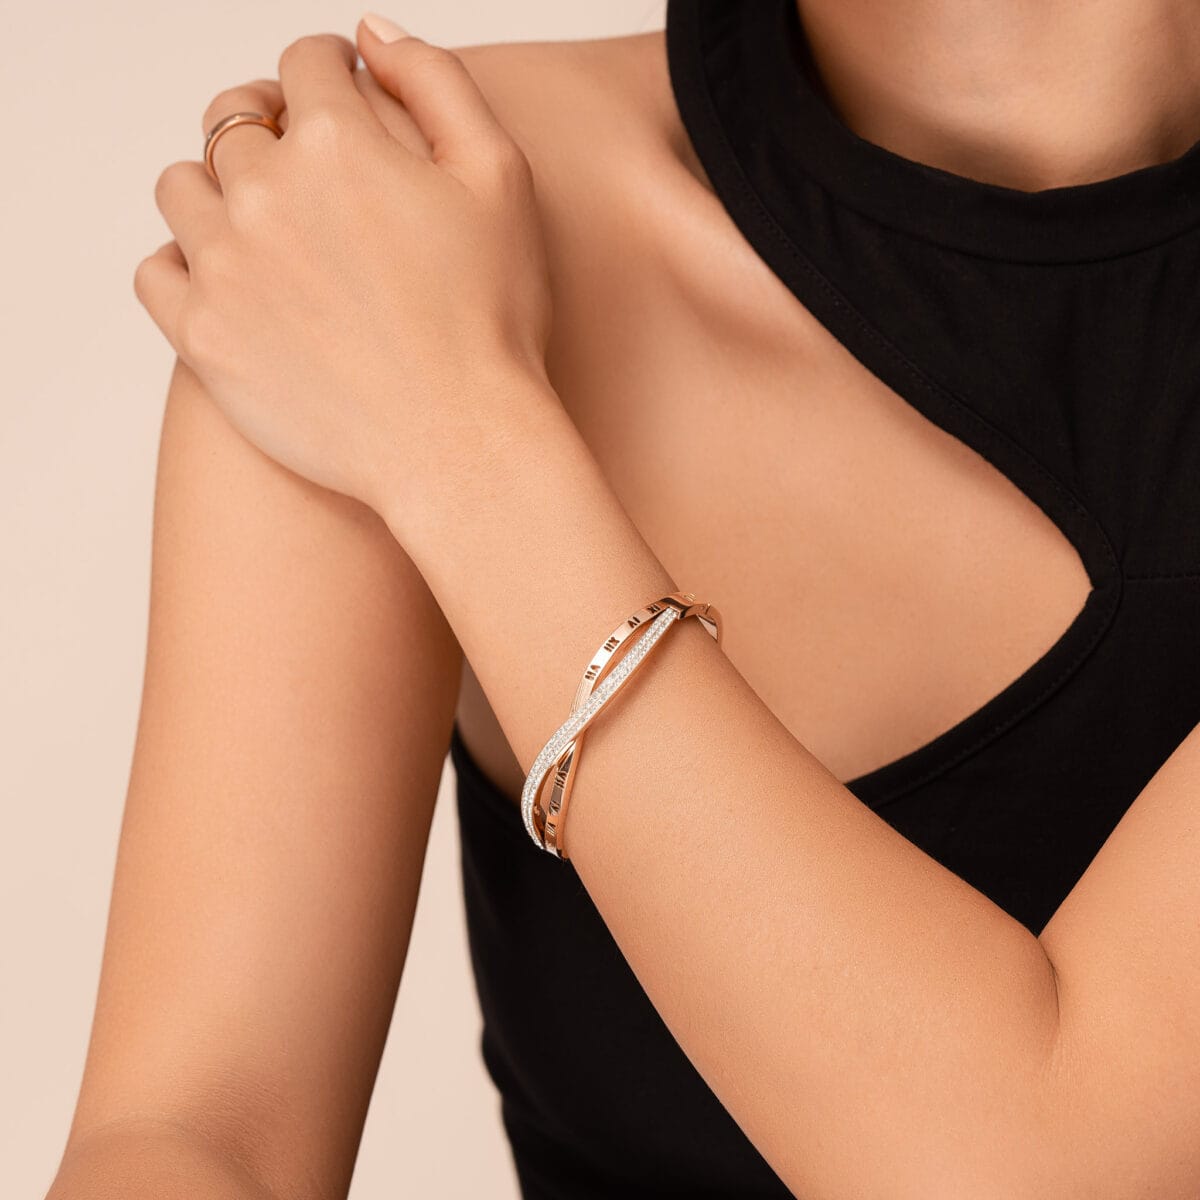 https://m.clubbella.co/product/taylor/ taylar 18k rose gold bangle (4)